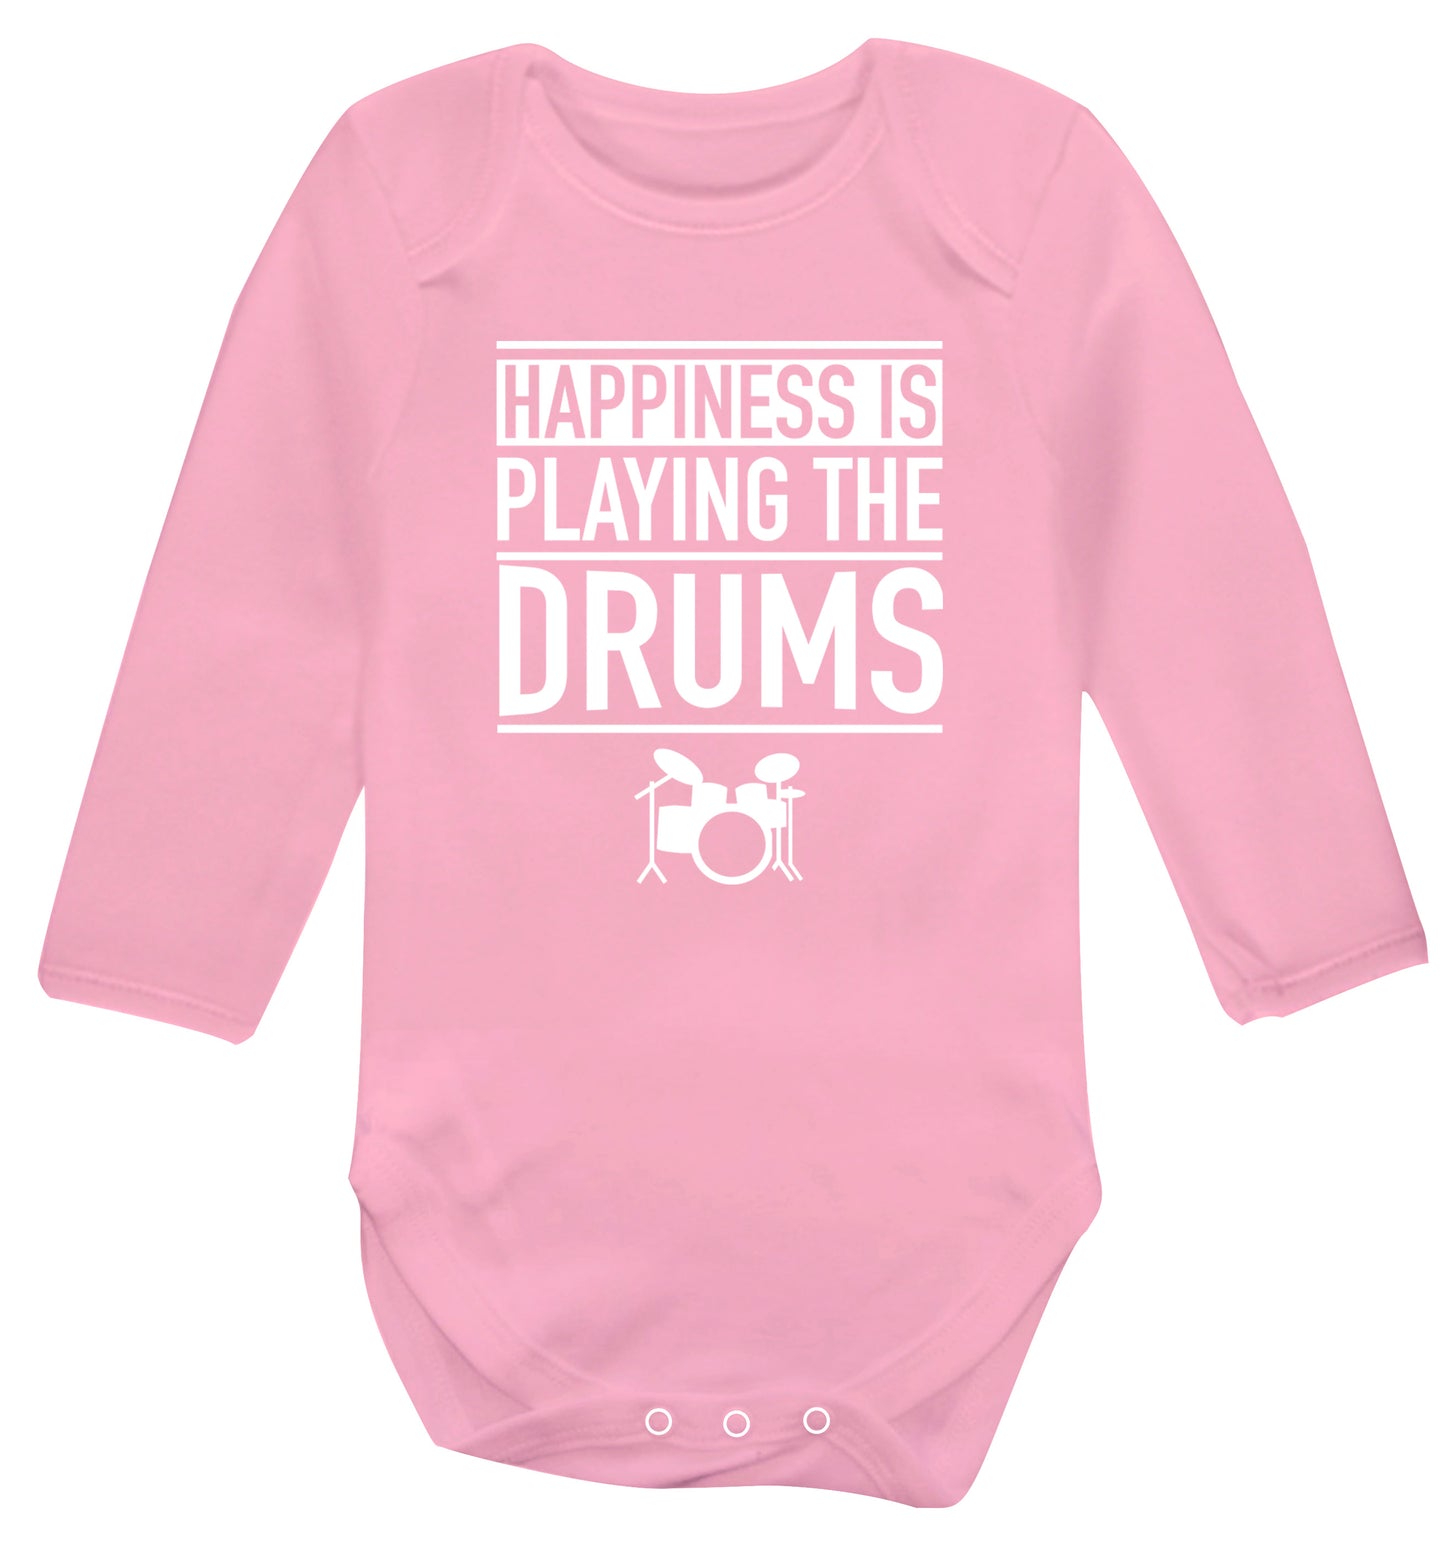 Happiness is playing the drums Baby Vest long sleeved pale pink 6-12 months